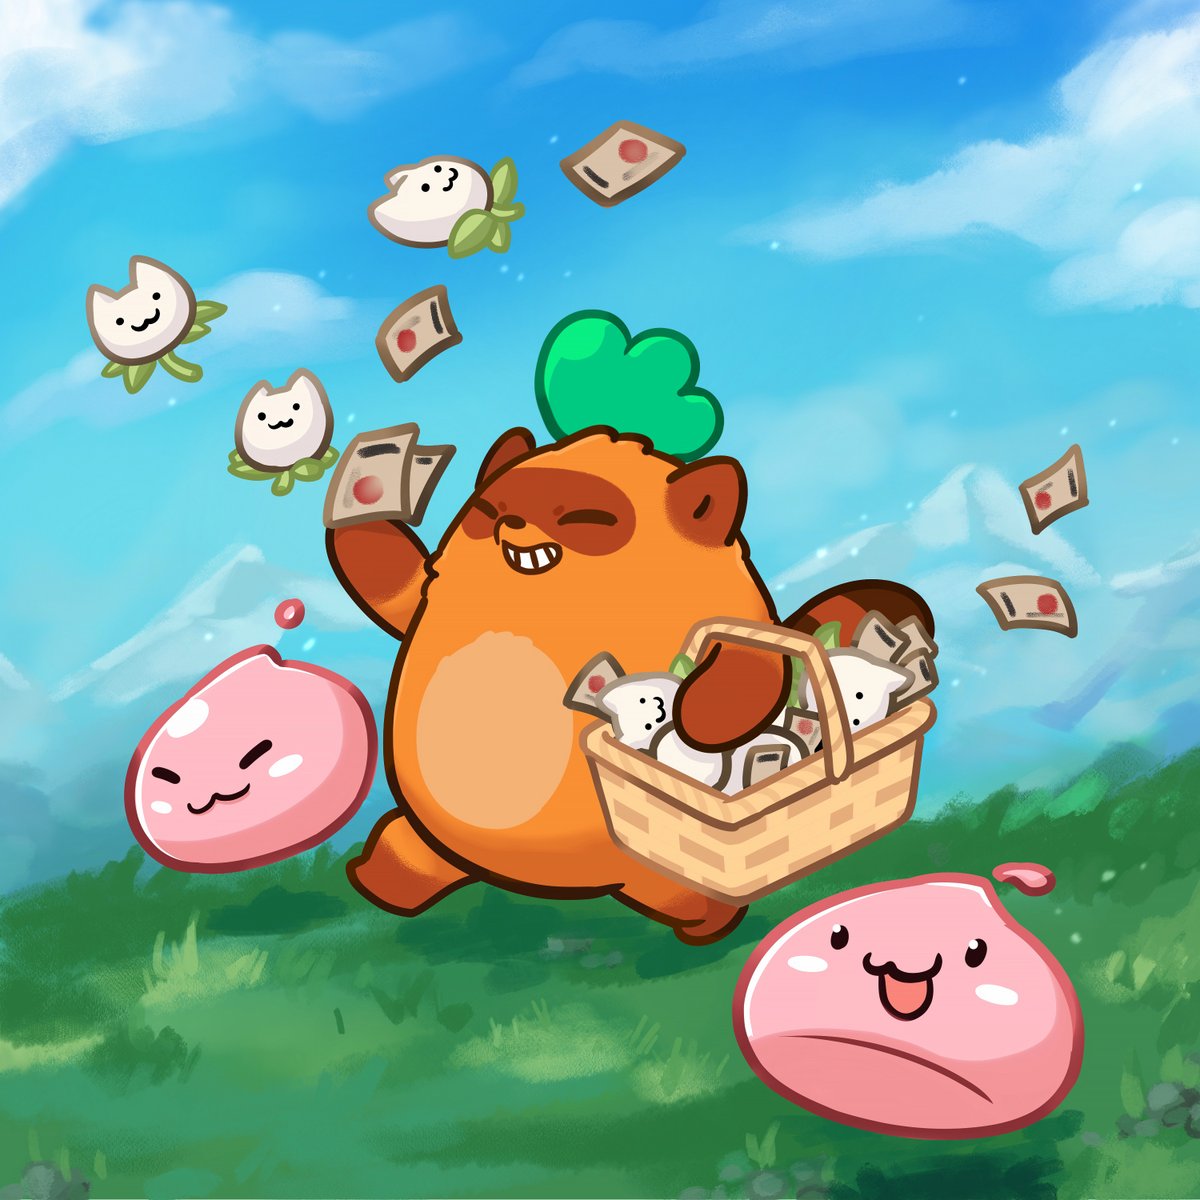 Moku HQ x @RagmonNFT Special Event starts NOW!

Complete daily quests, roll the gacha & visit the shop to get your hands on

✨Nyang Kit Whitelist & Allowlist
✨Origin Axies
✨Japanese Axies
✨Summer Axies
✨$RON & moar!

Head over to hq.moku.gg and start questing!